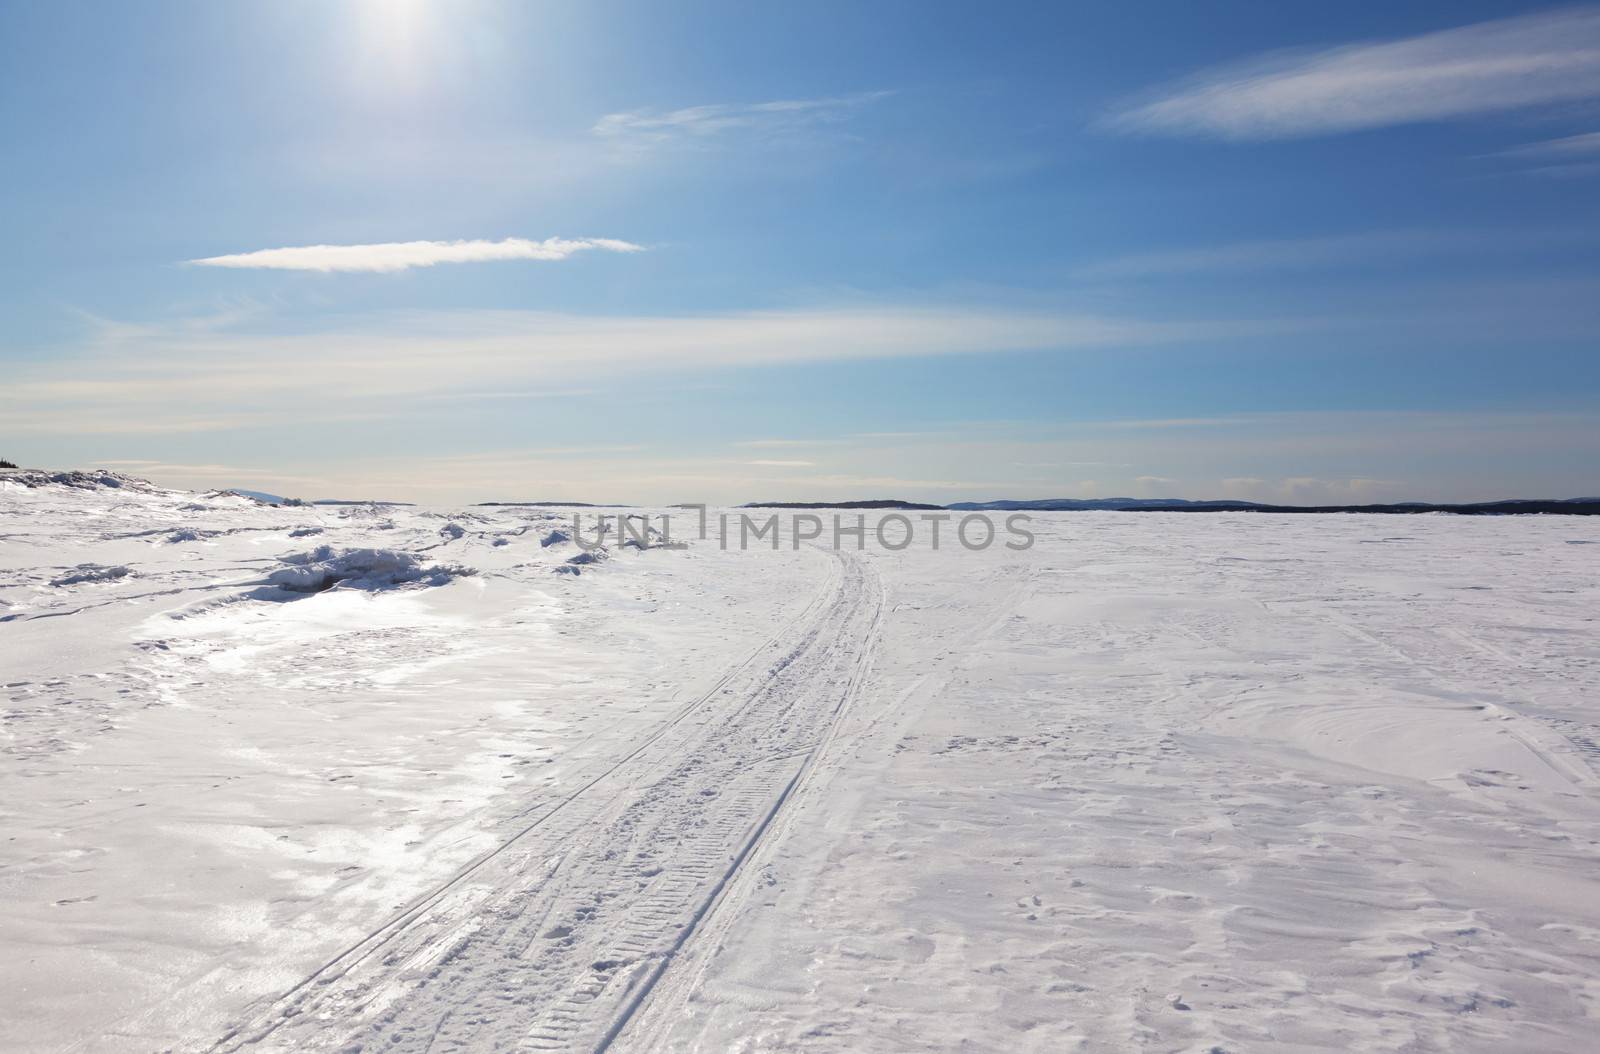 Snowmobile trail stretching into the distance against the blue sky and snowy expanses of Russia. Kandalaksha Bay of the White Sea. 